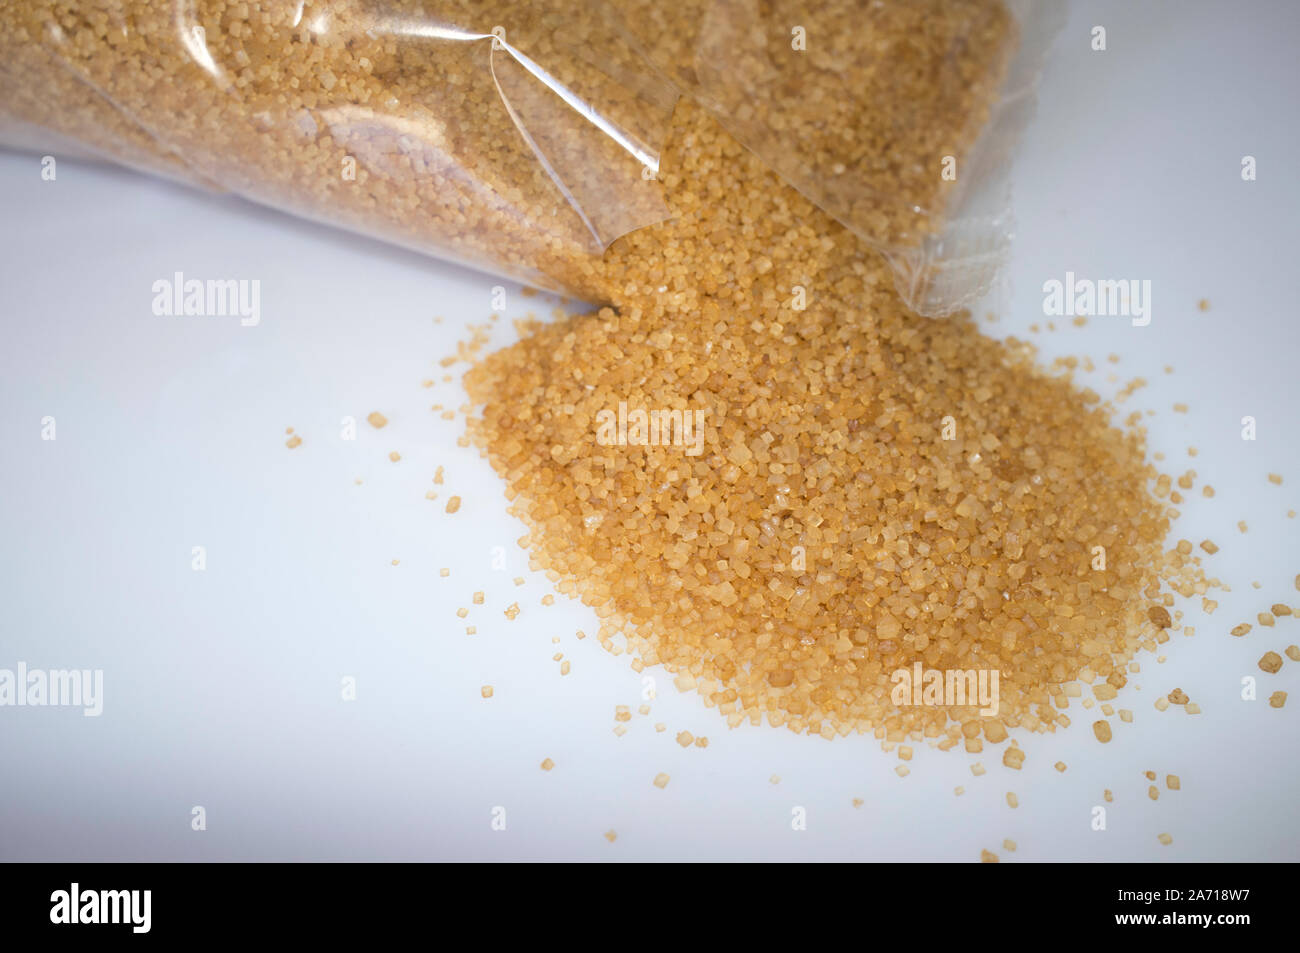 Plastic bag with spilled brown sugar. Close-up Stock Photo